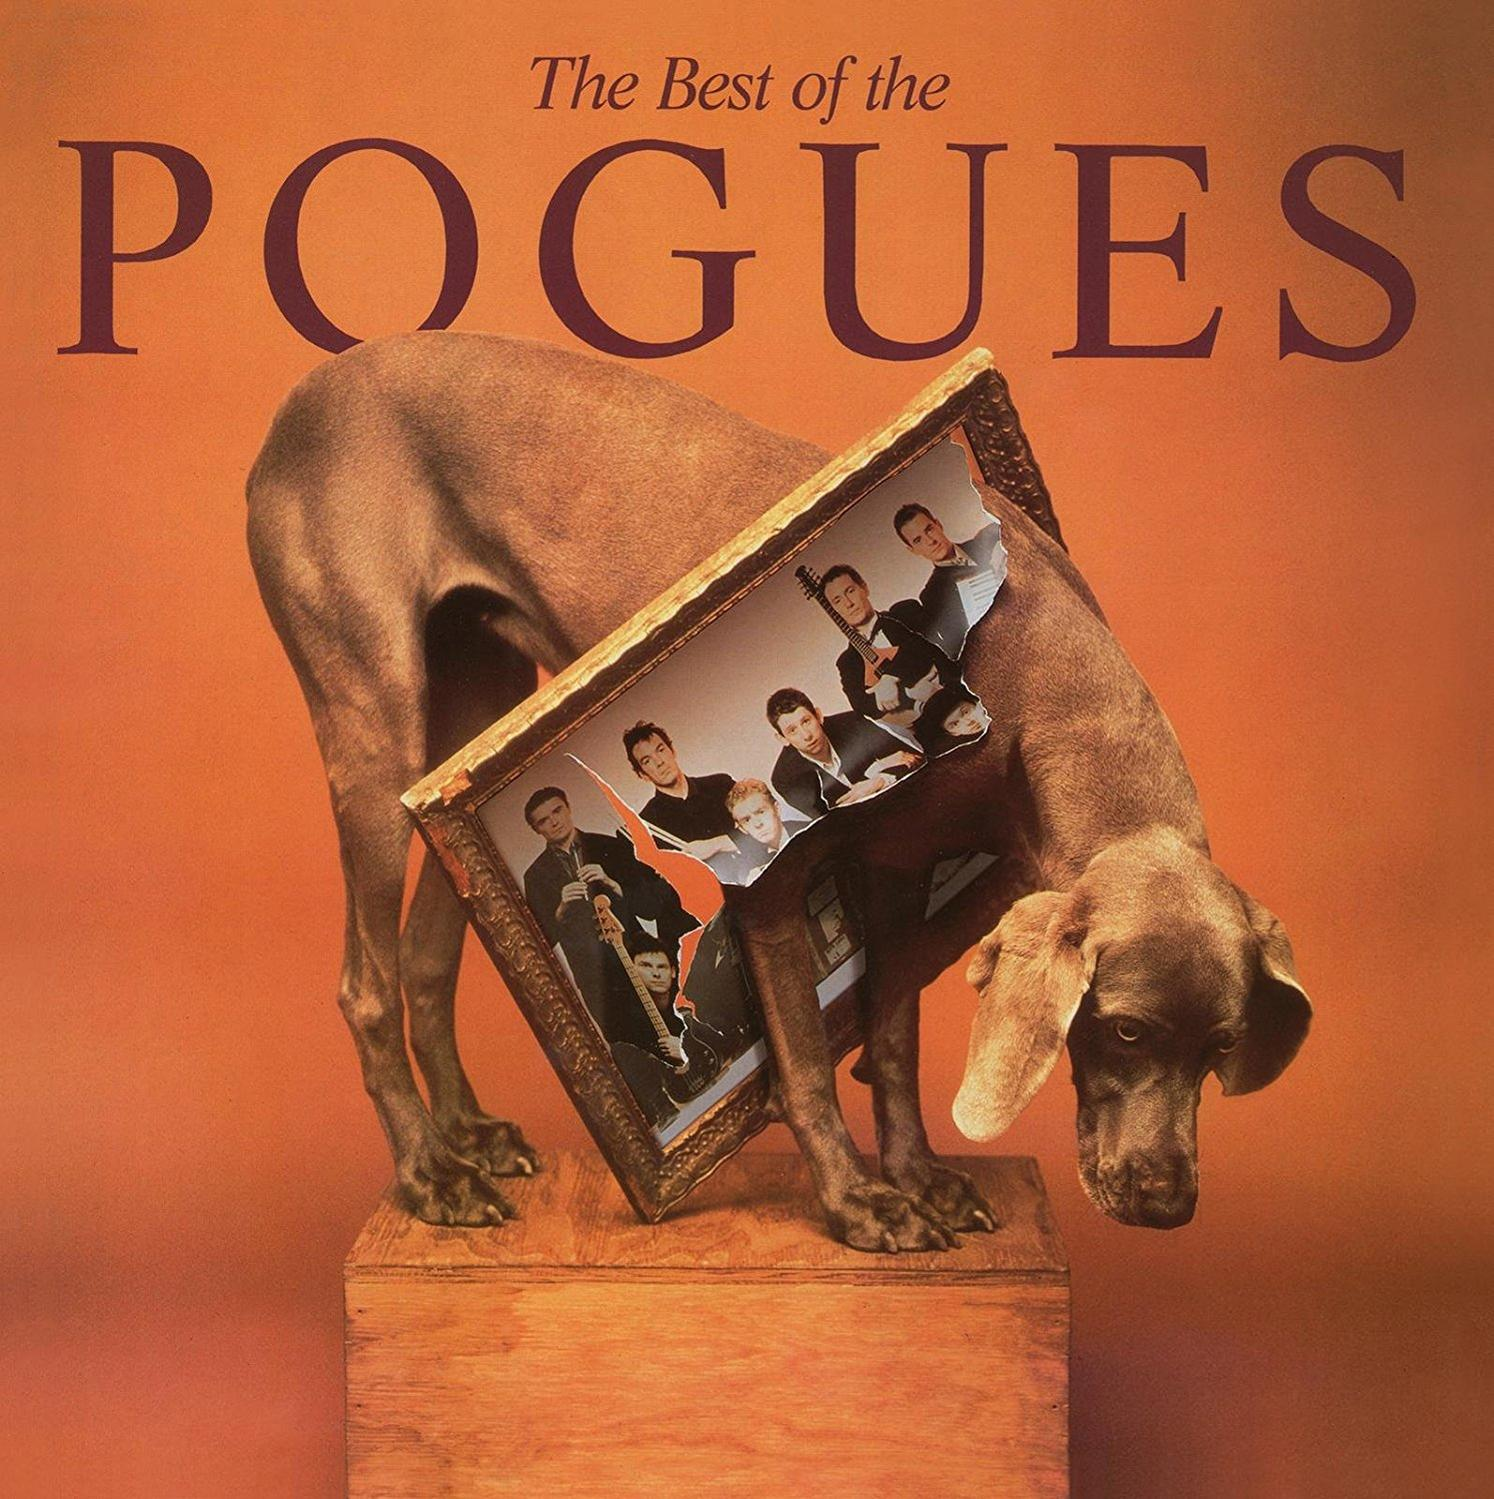 The Pogues - The Pogues (Vinyl) Best - The of